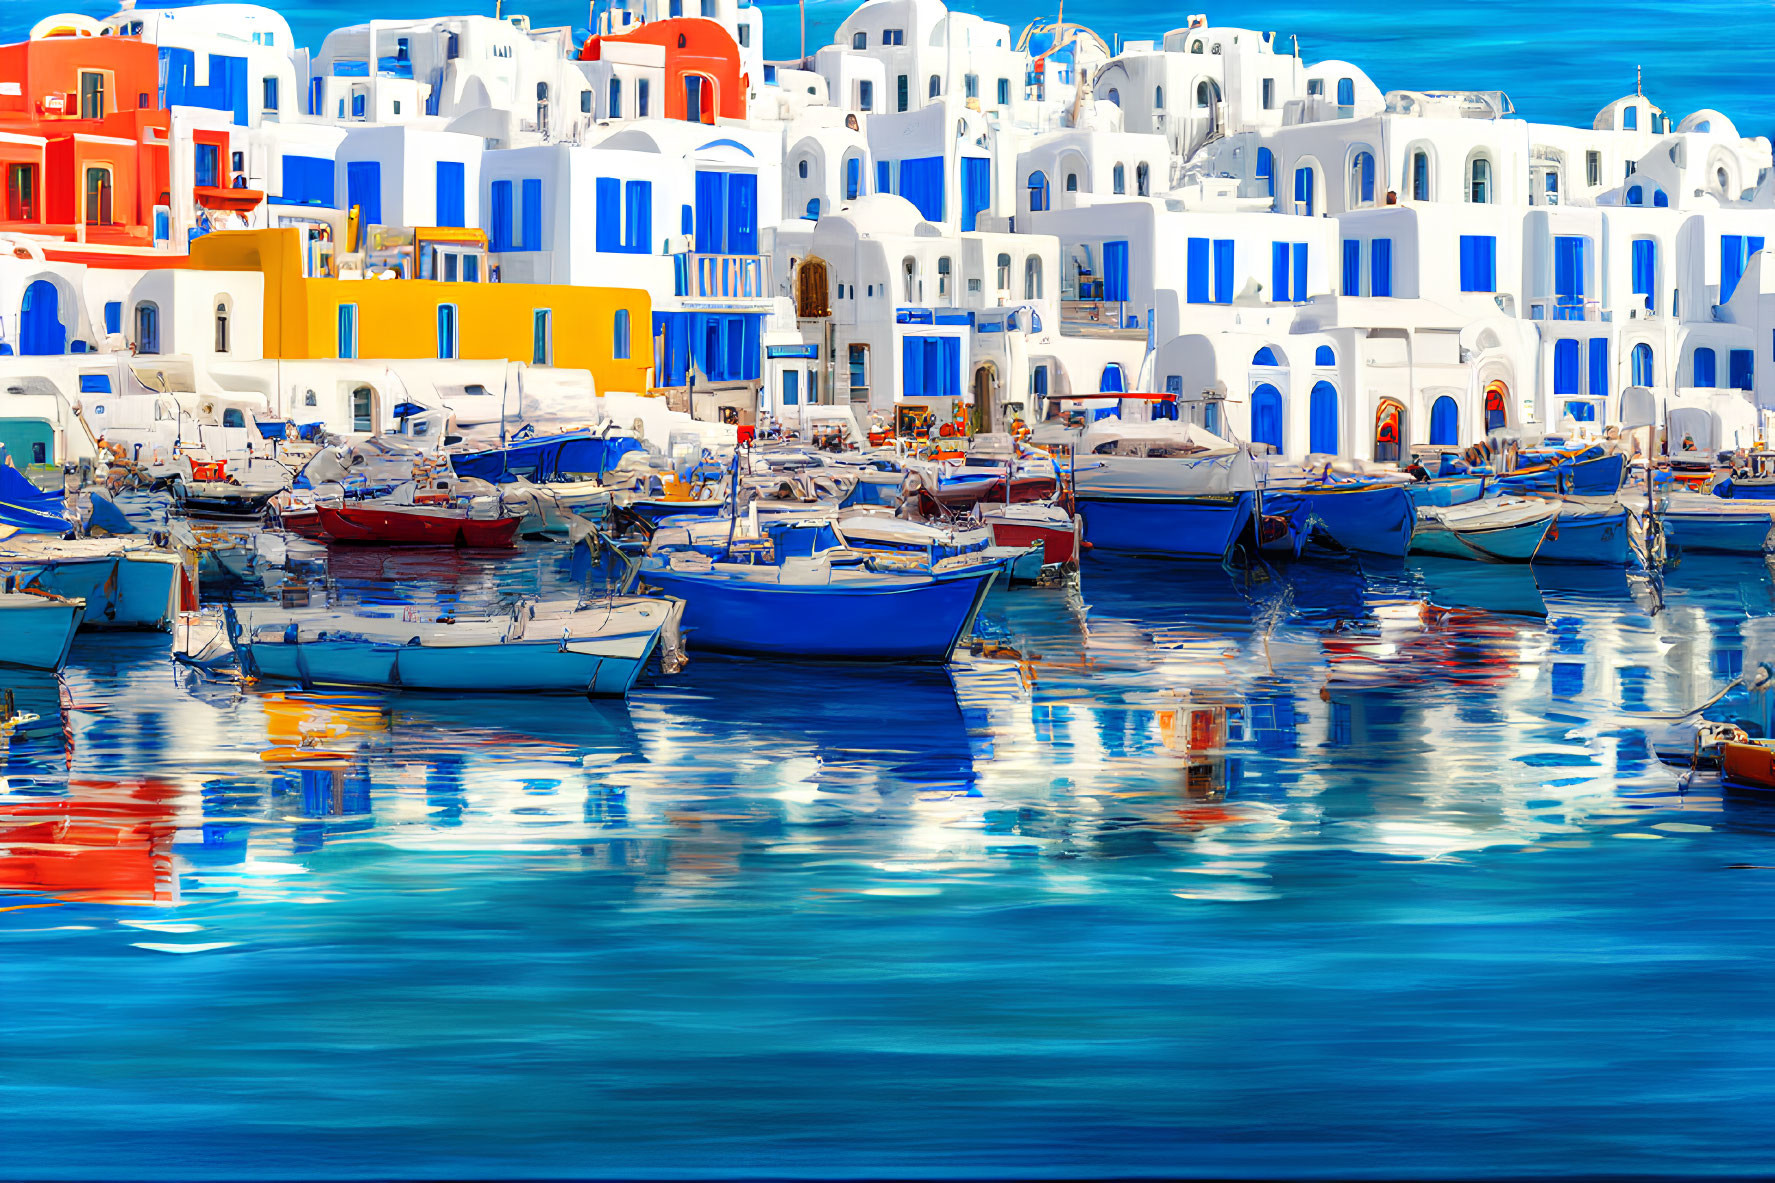 Colorful boats and white buildings in a vibrant harbor scene